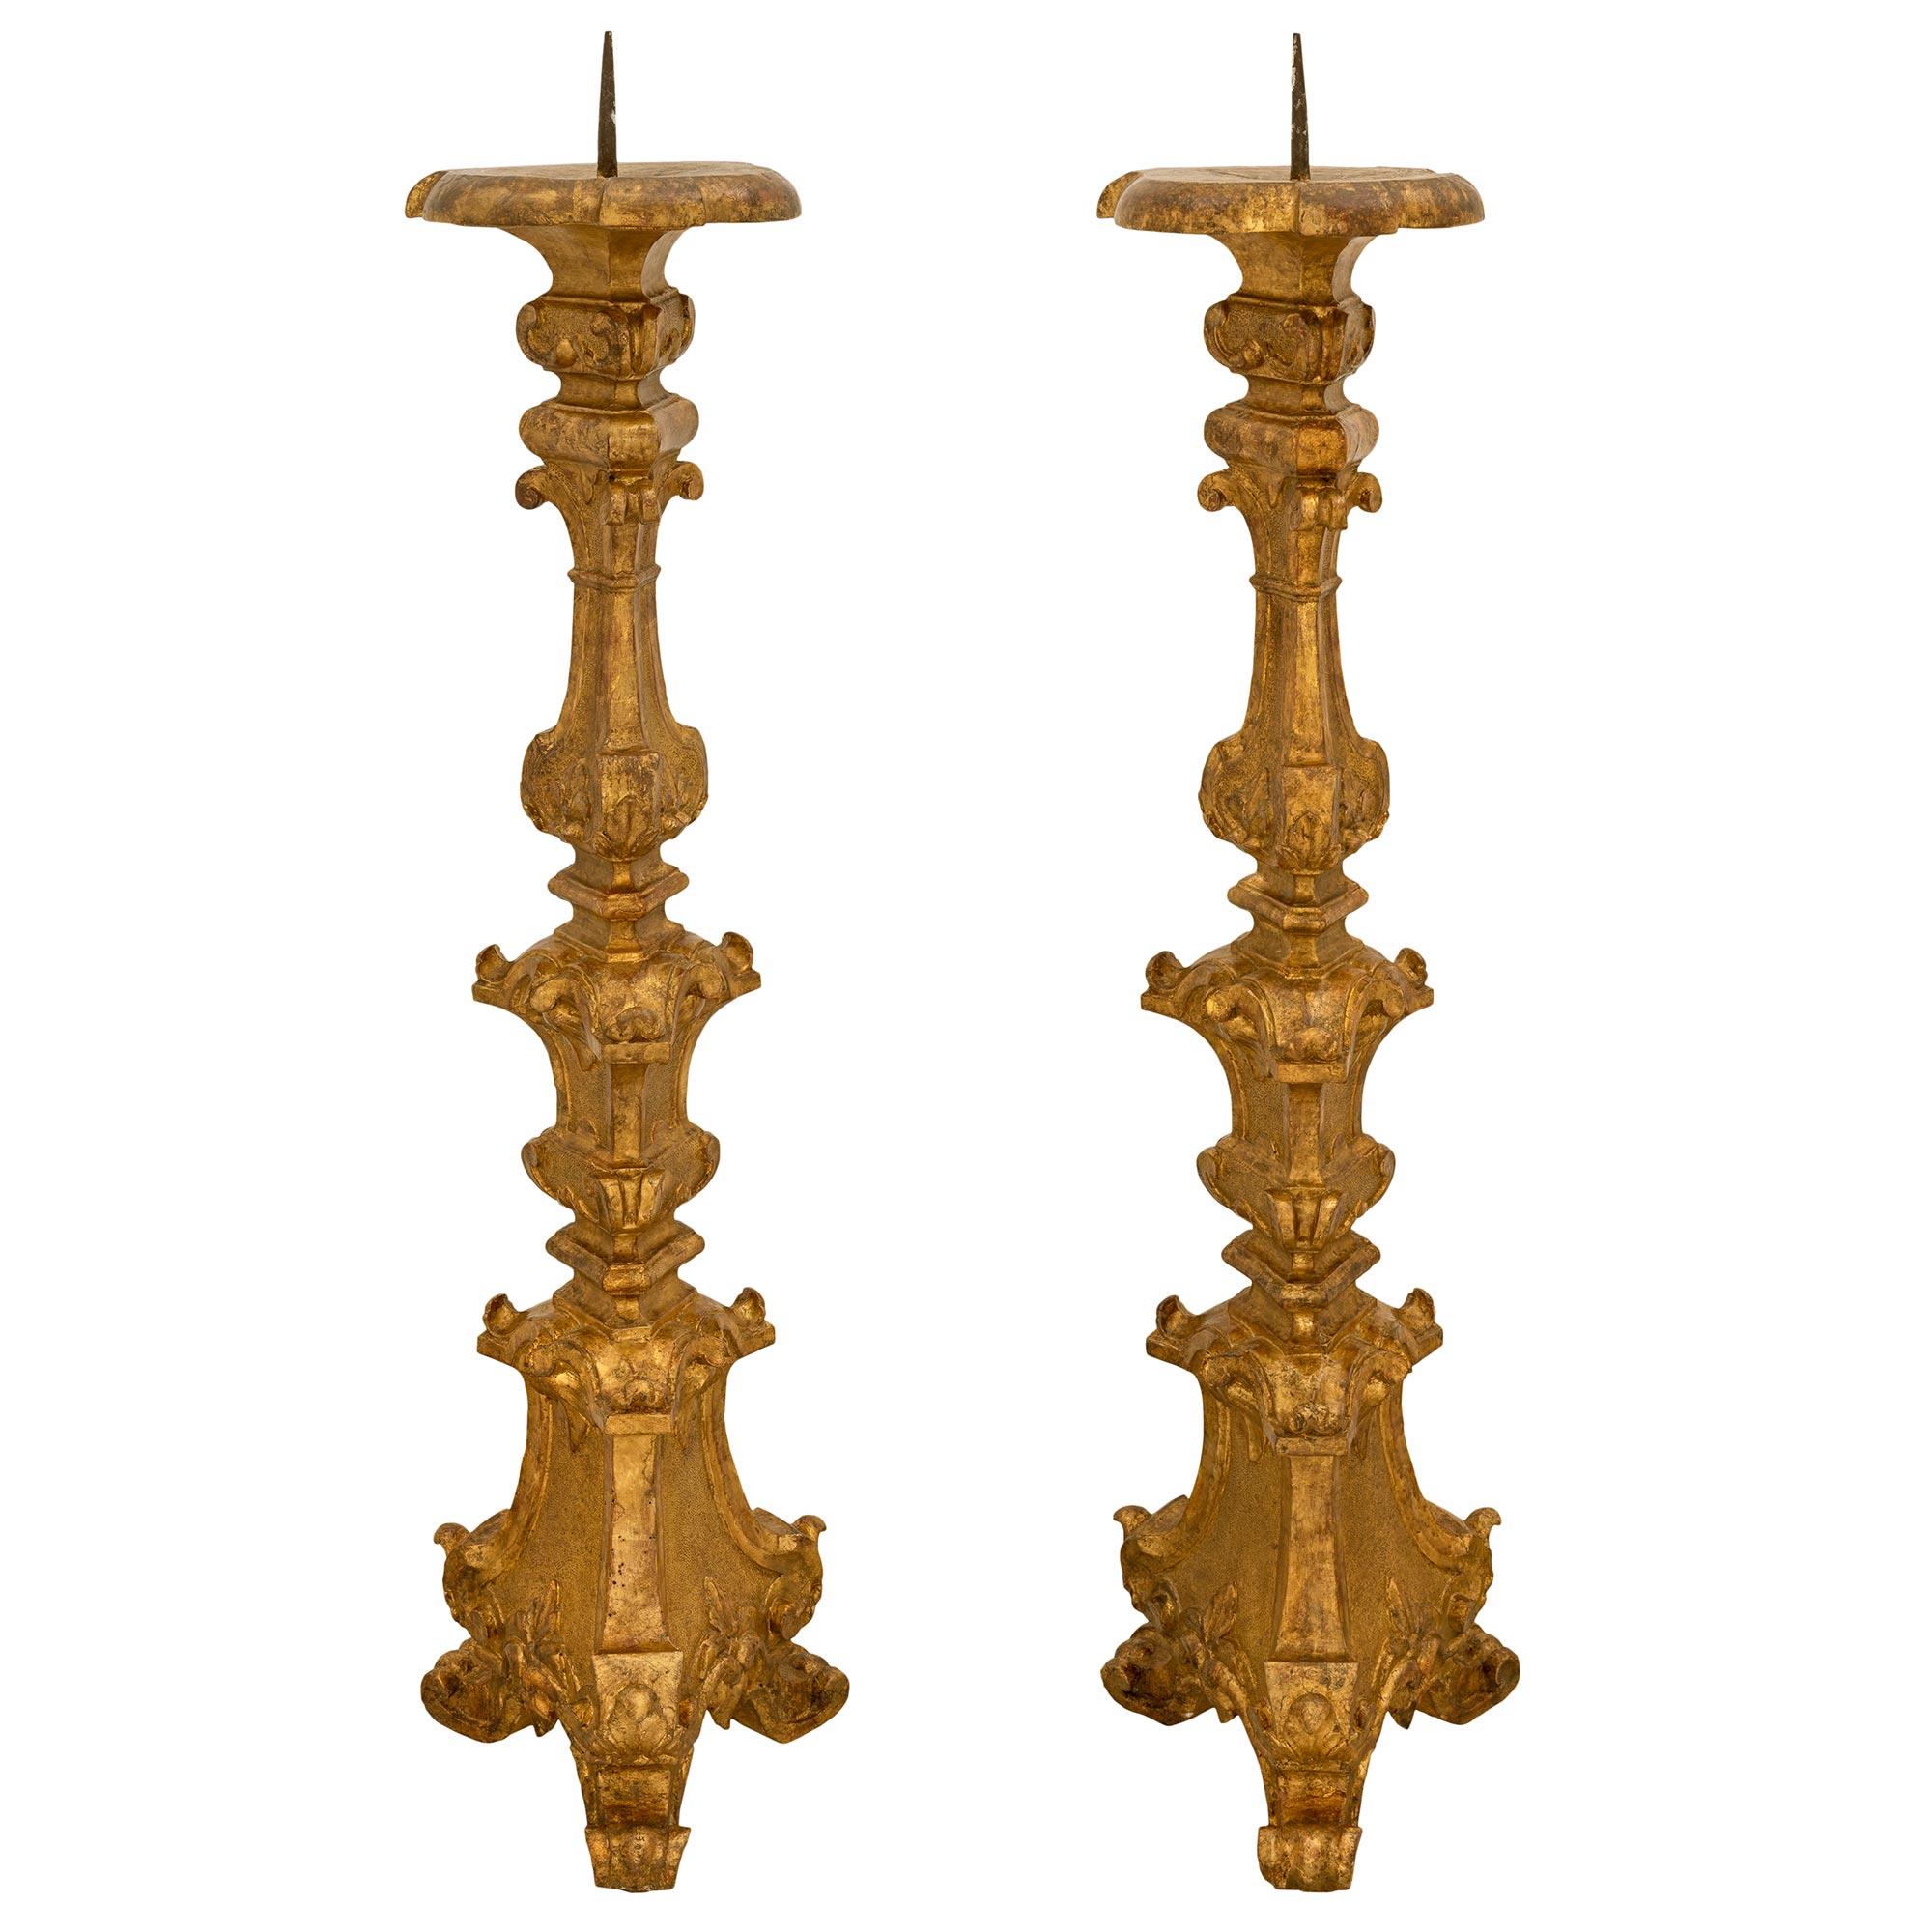 A striking pair of Italian 18th century Baroque period Mecca Torchières. Each Torchière is raised by three elegant scrolled feet below the triangular shaped lightly curved base with lovely foliate carvings and a fine hammered design. The central